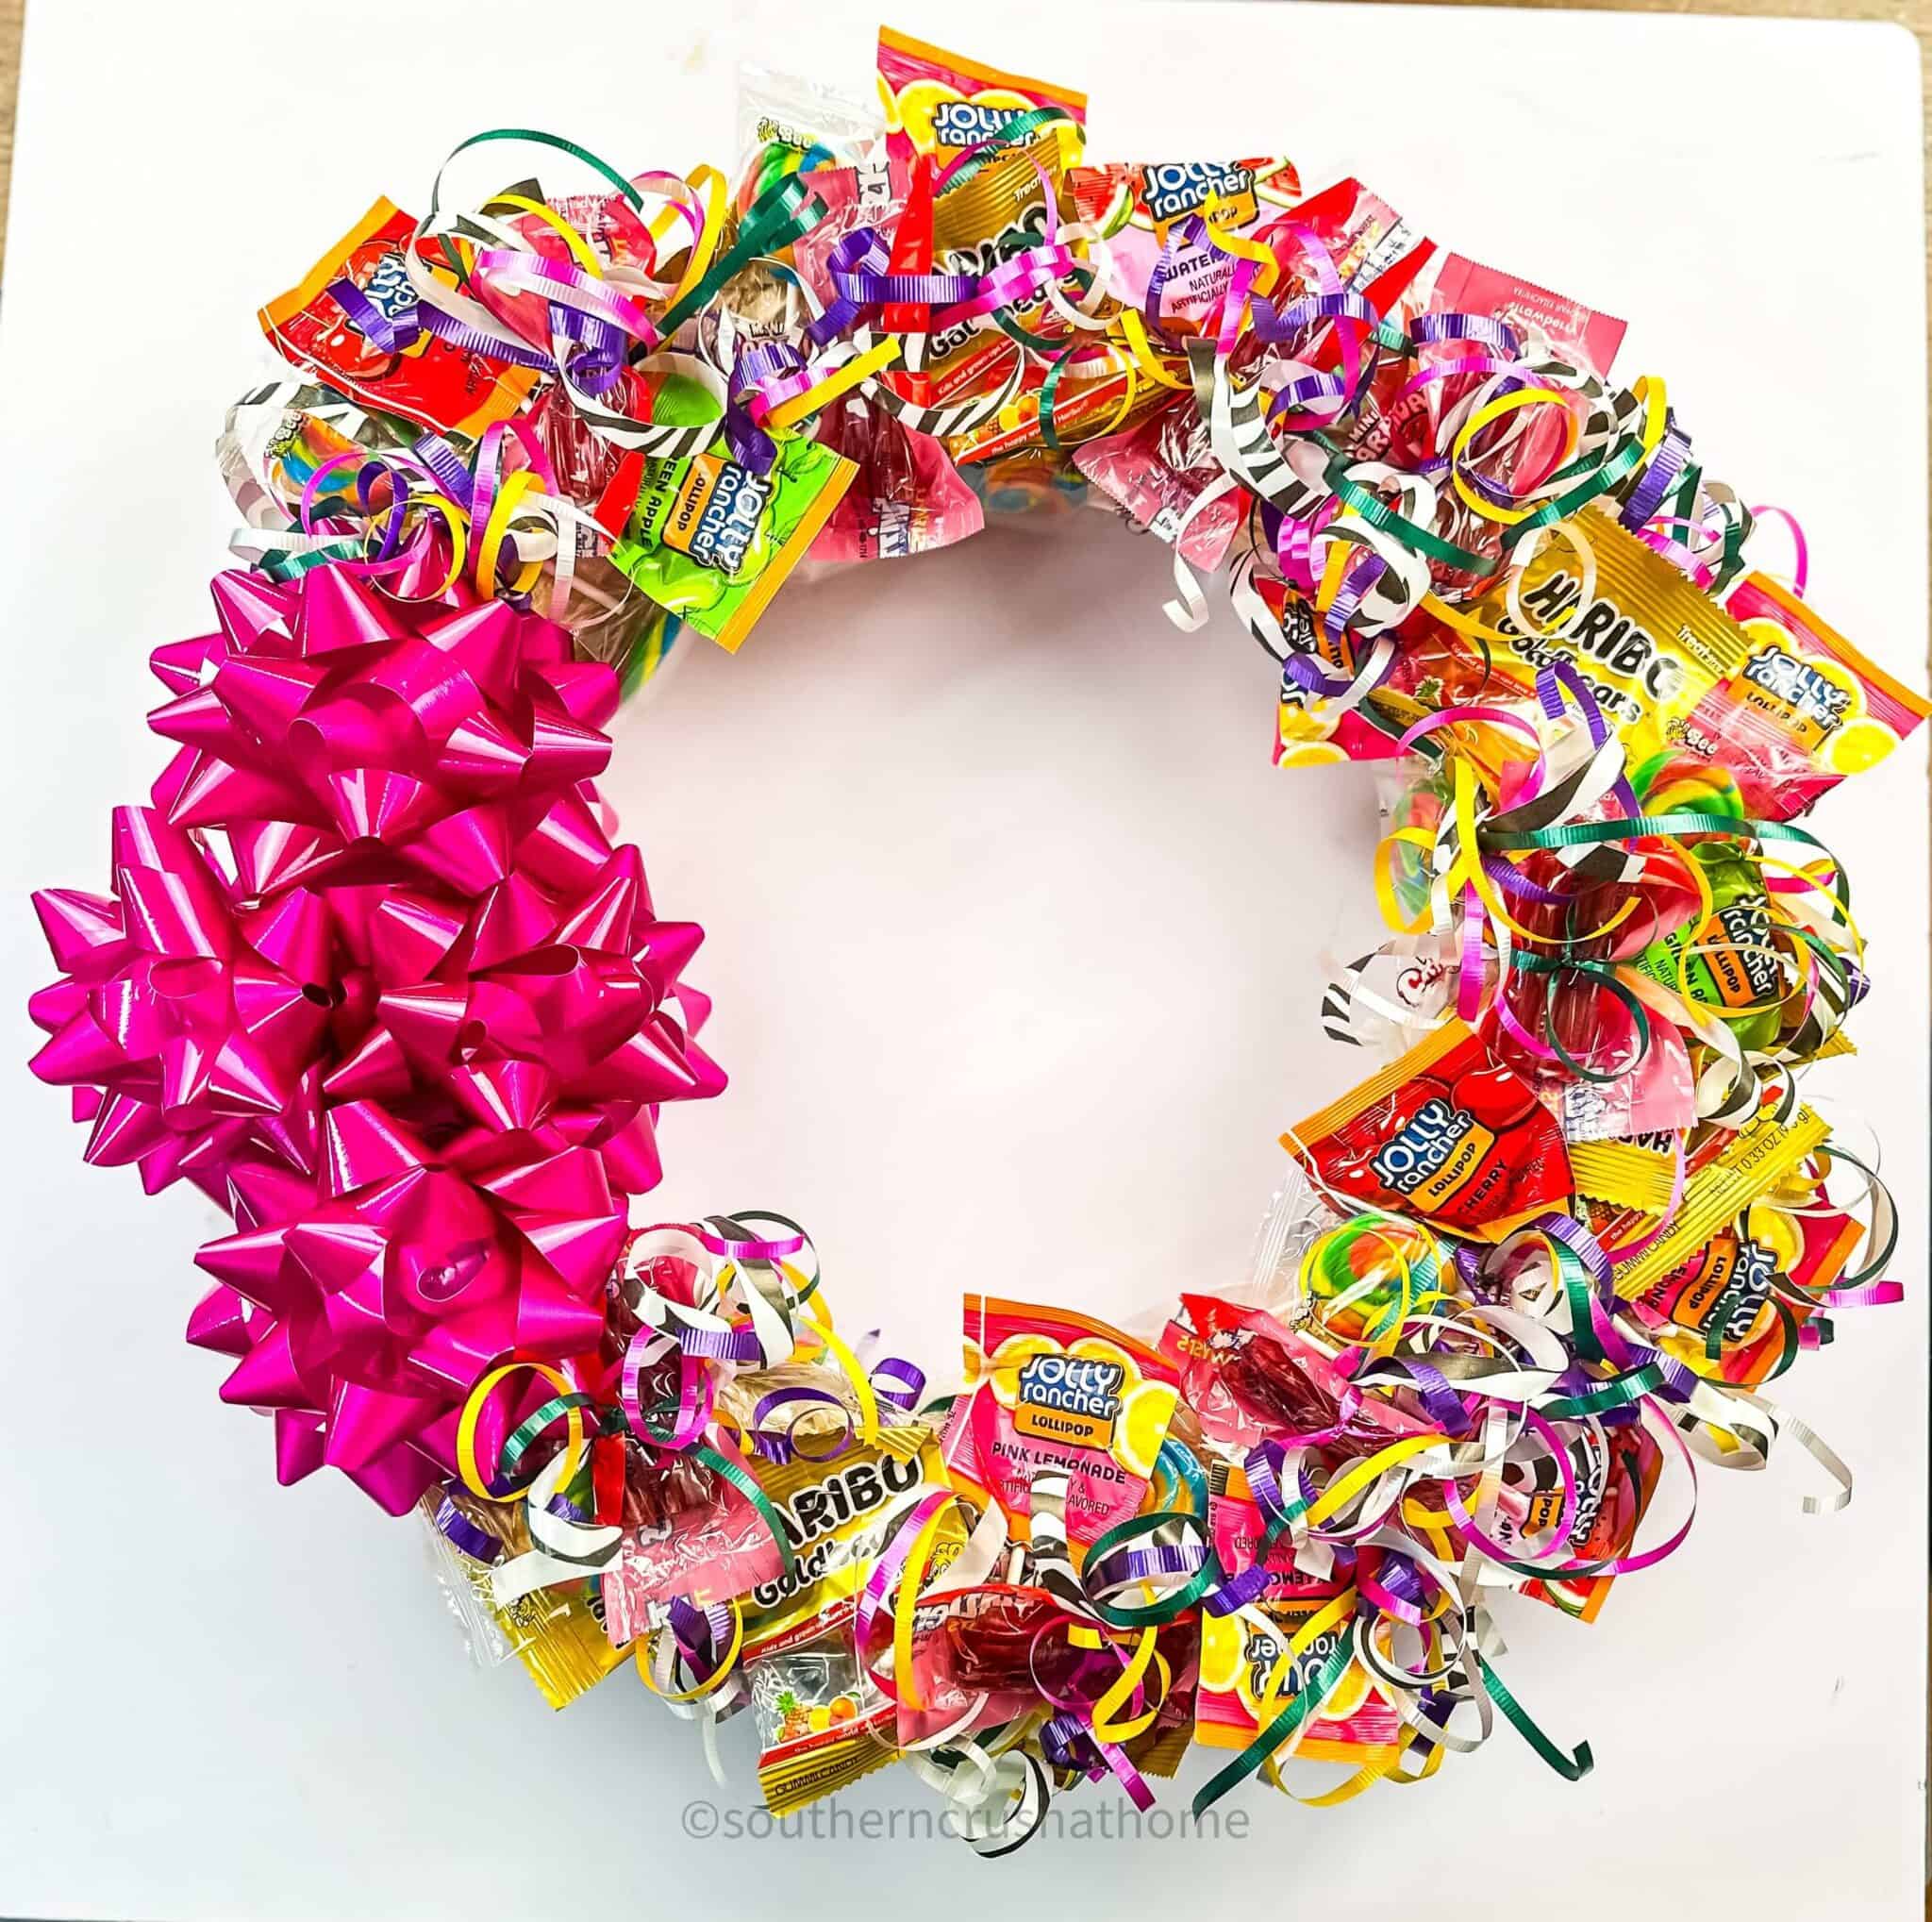 finished candy wreath on white background